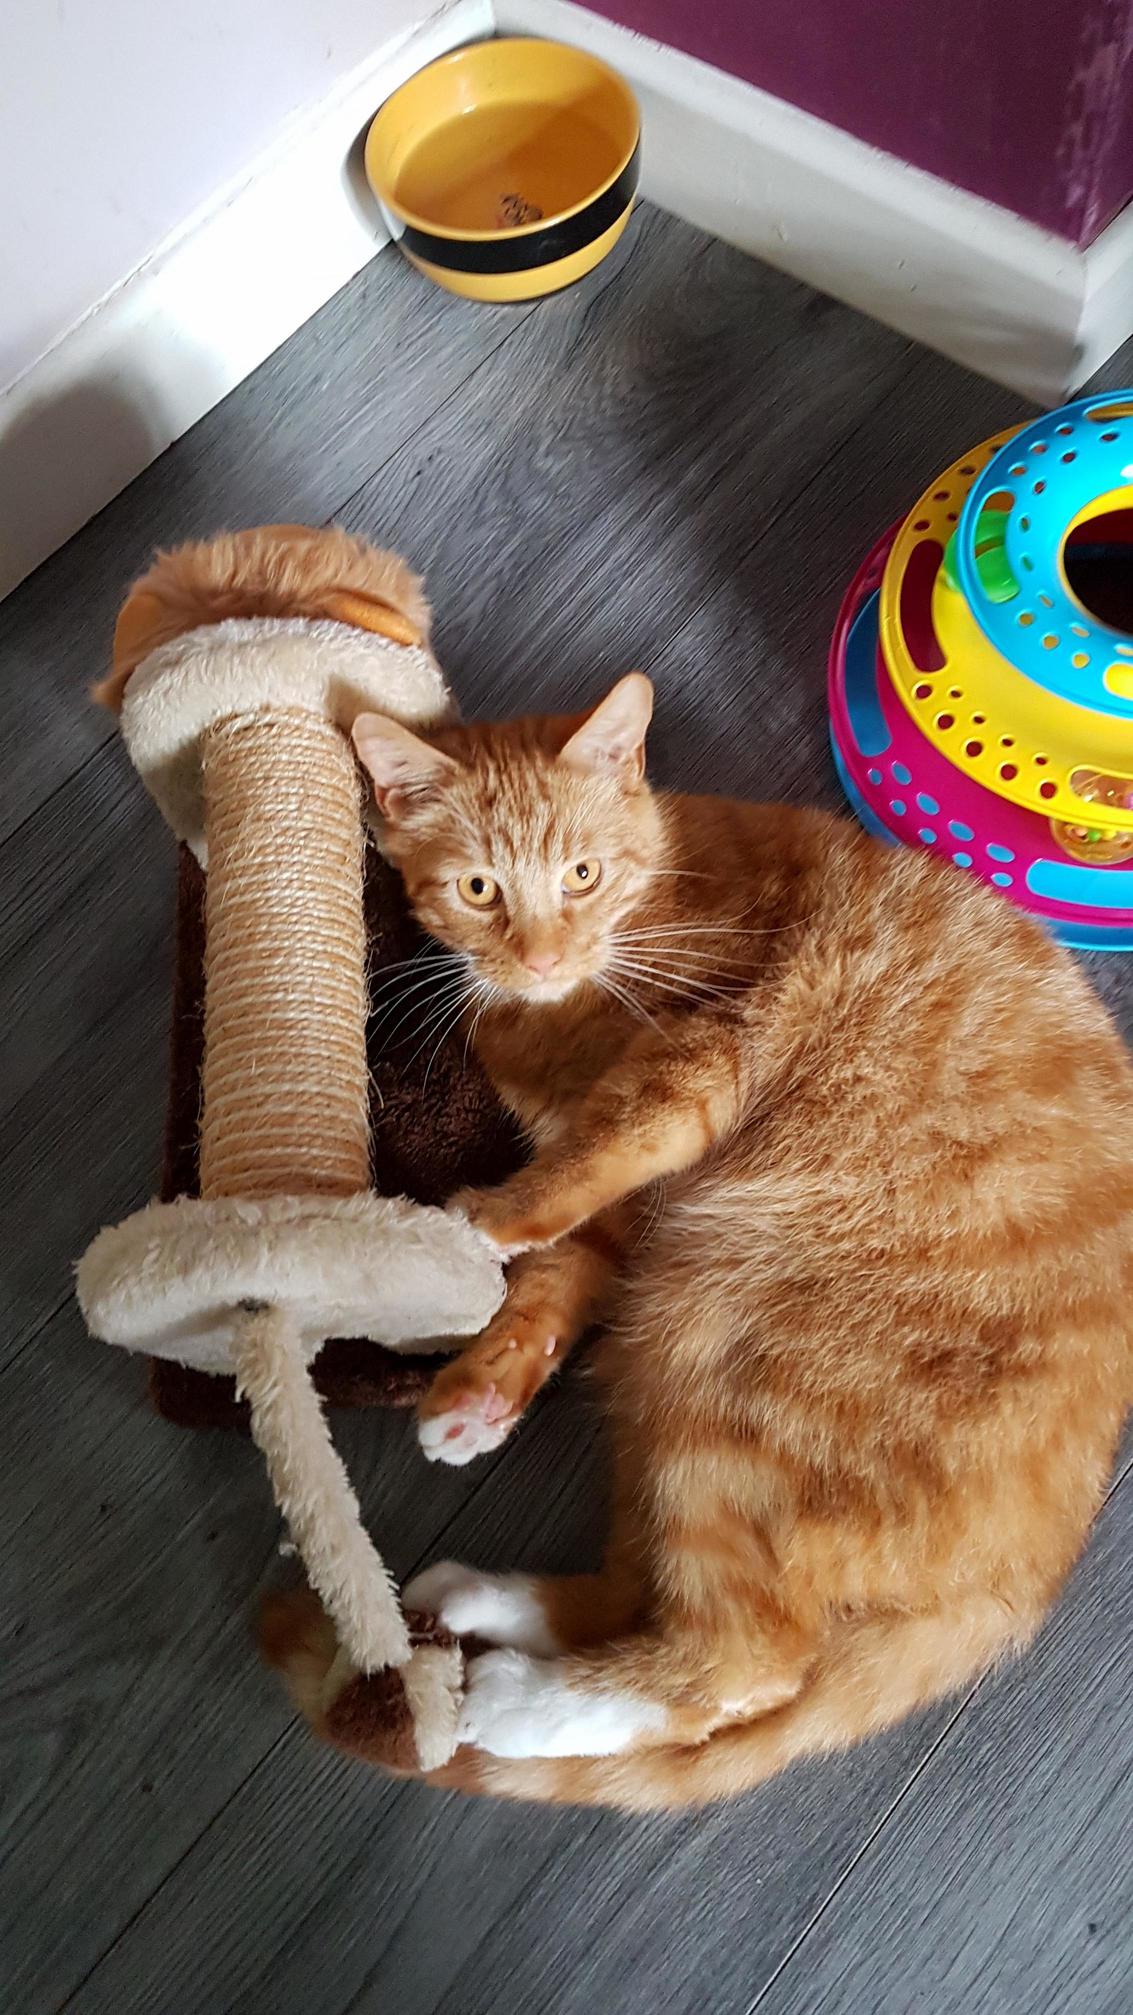 I think he likes his new toy 